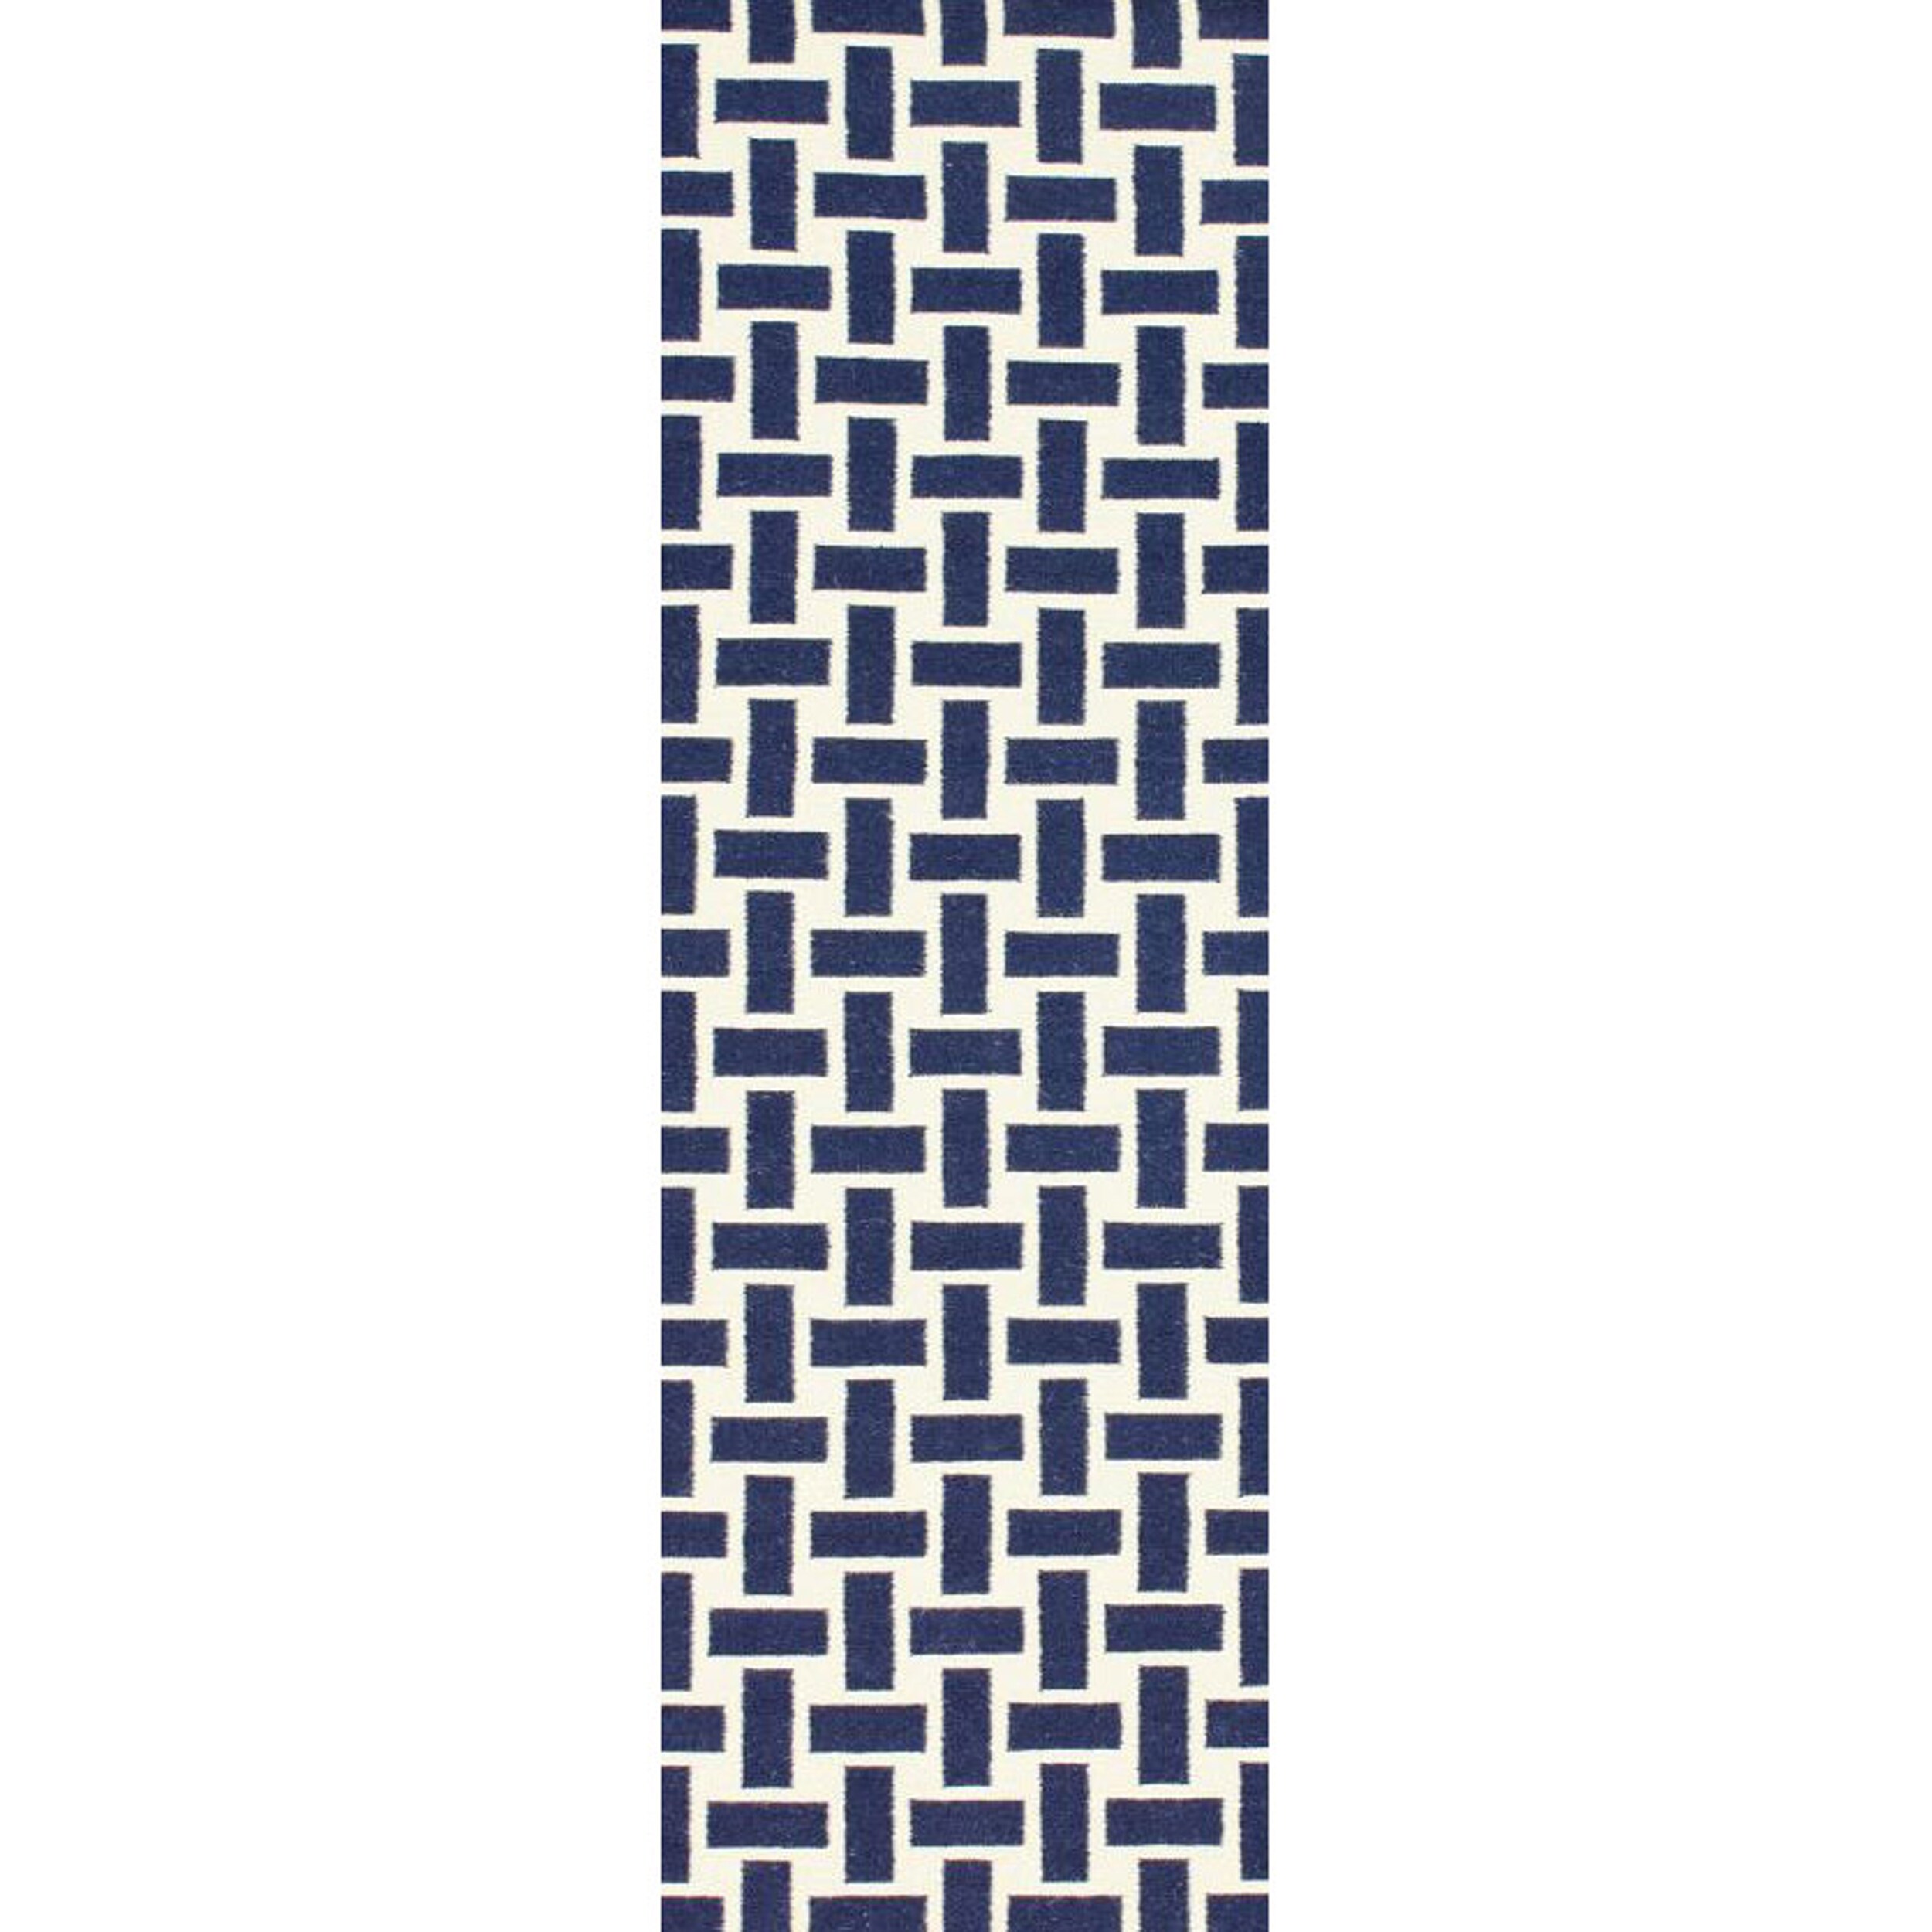 Nuloom Handmade Trellis Flatweave Kilim Navy Wool Runner Rug (26 X 8) (IvoryPattern AbstractTip We recommend the use of a non skid pad to keep the rug in place on smooth surfaces.All rug sizes are approximate. Due to the difference of monitor colors, so